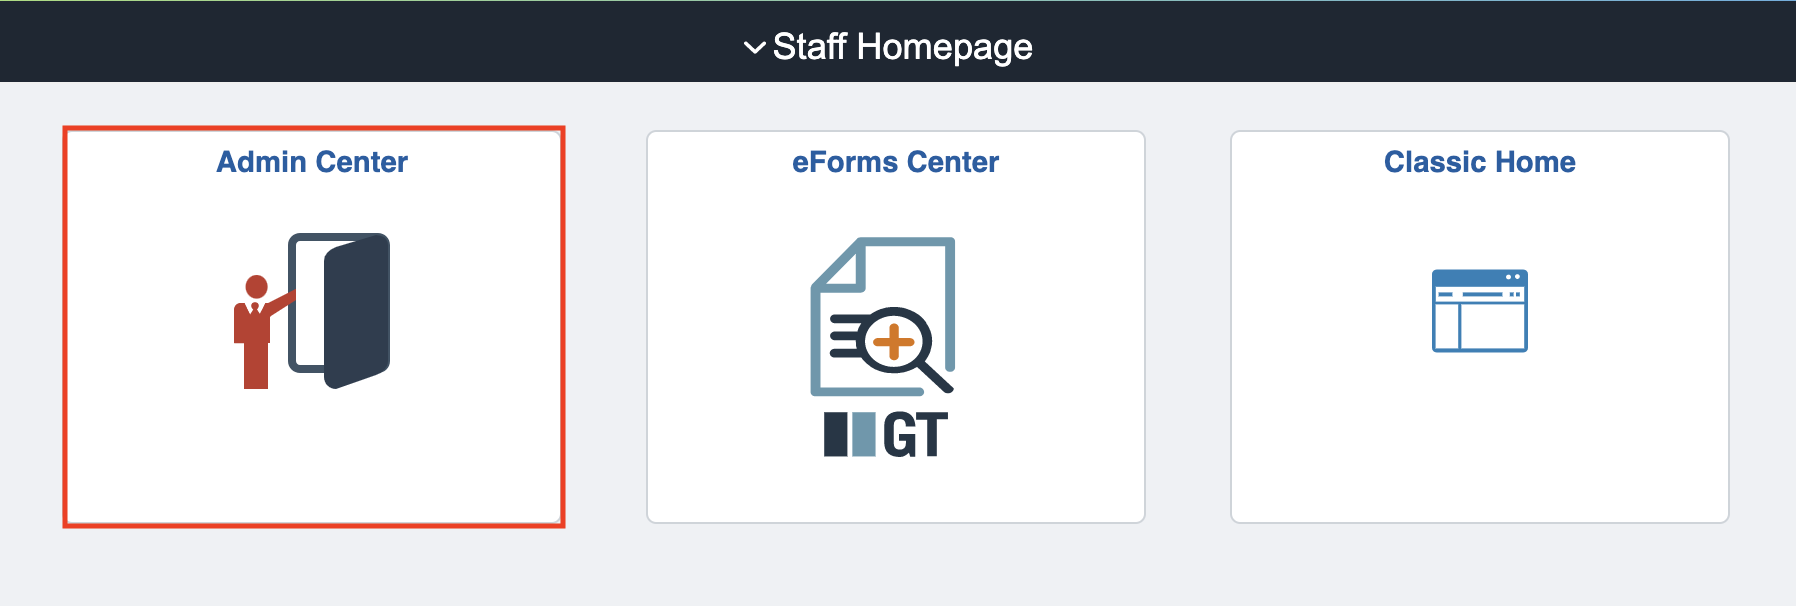 Admin Center tile under the Staff Homepage